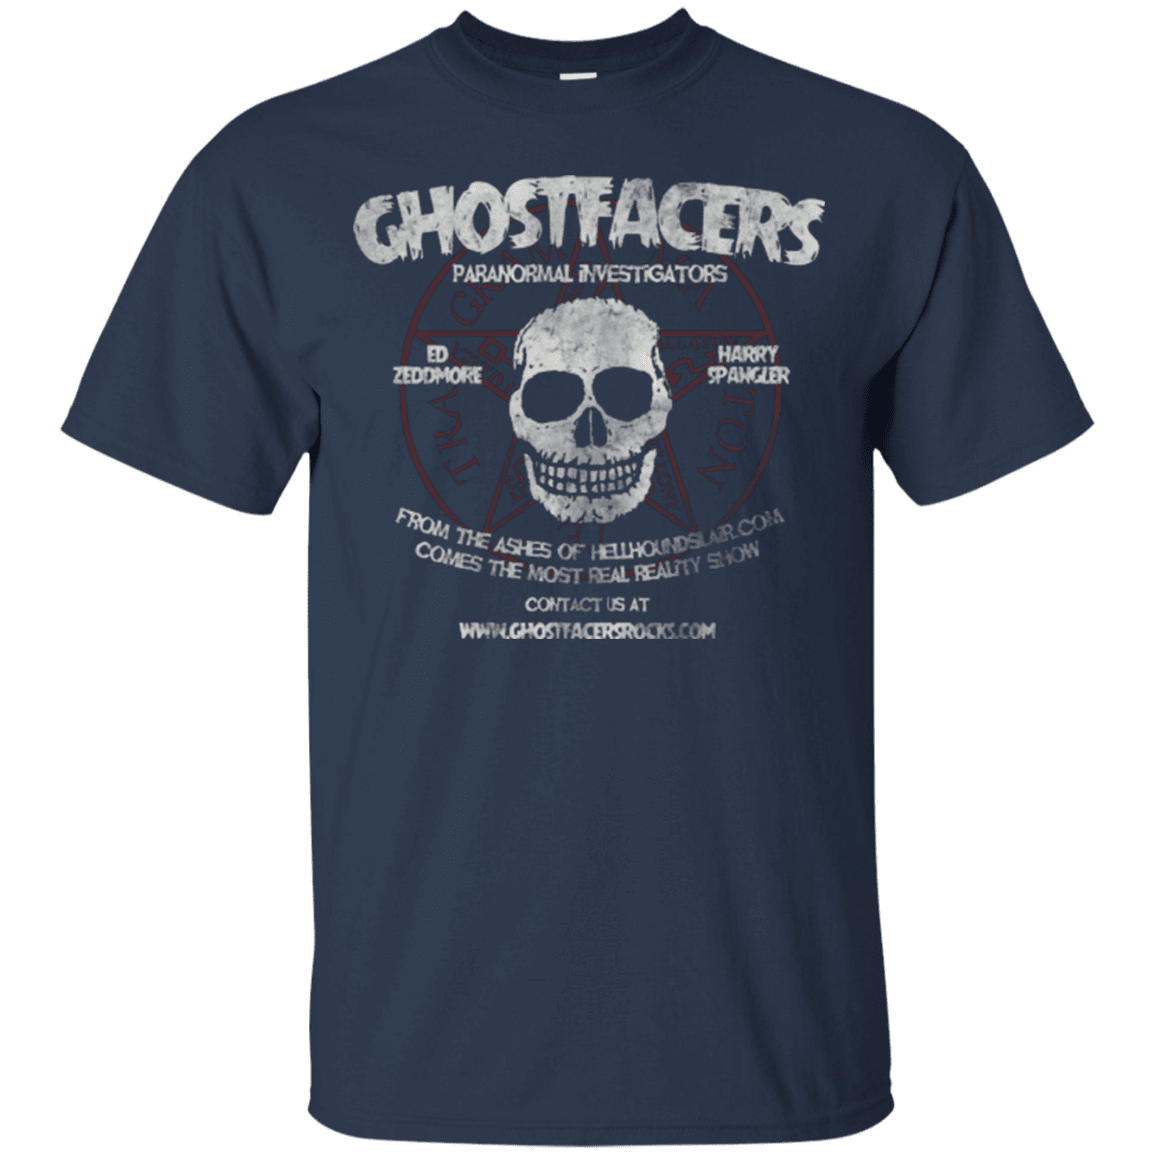 T-Shirts Navy / Small Ghostfacers T-Shirt